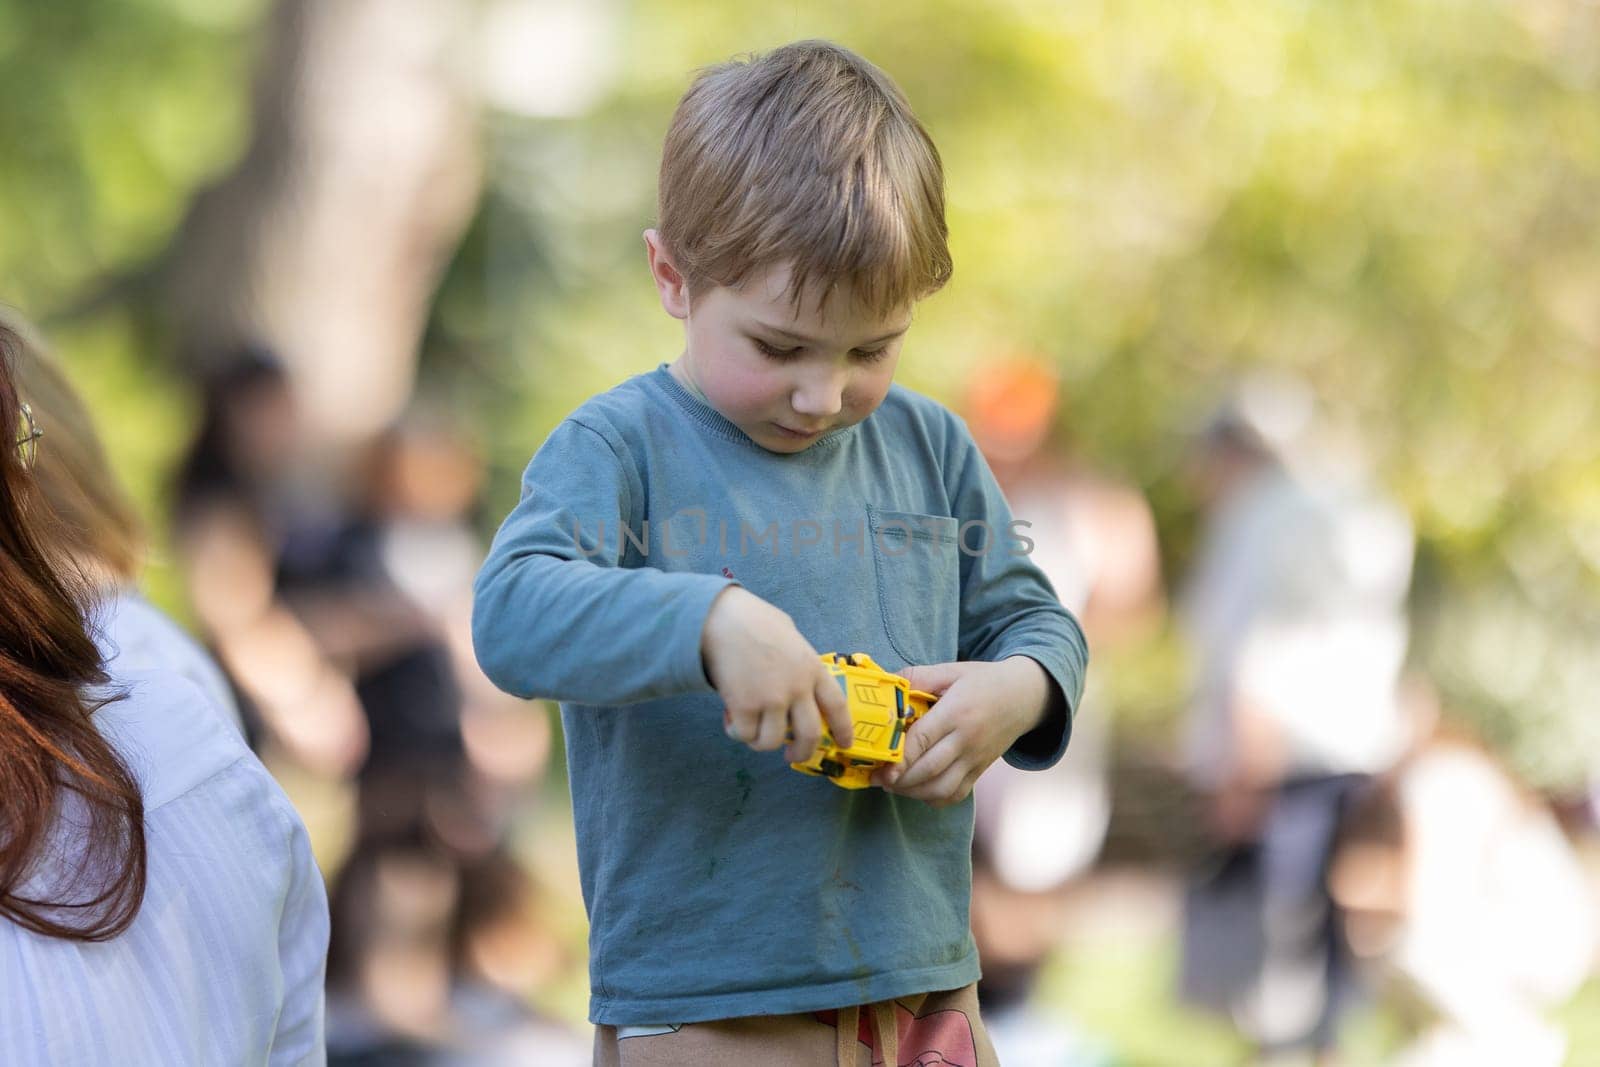 A boy is playing with a toy car. He is holding it in his hands and looking at it